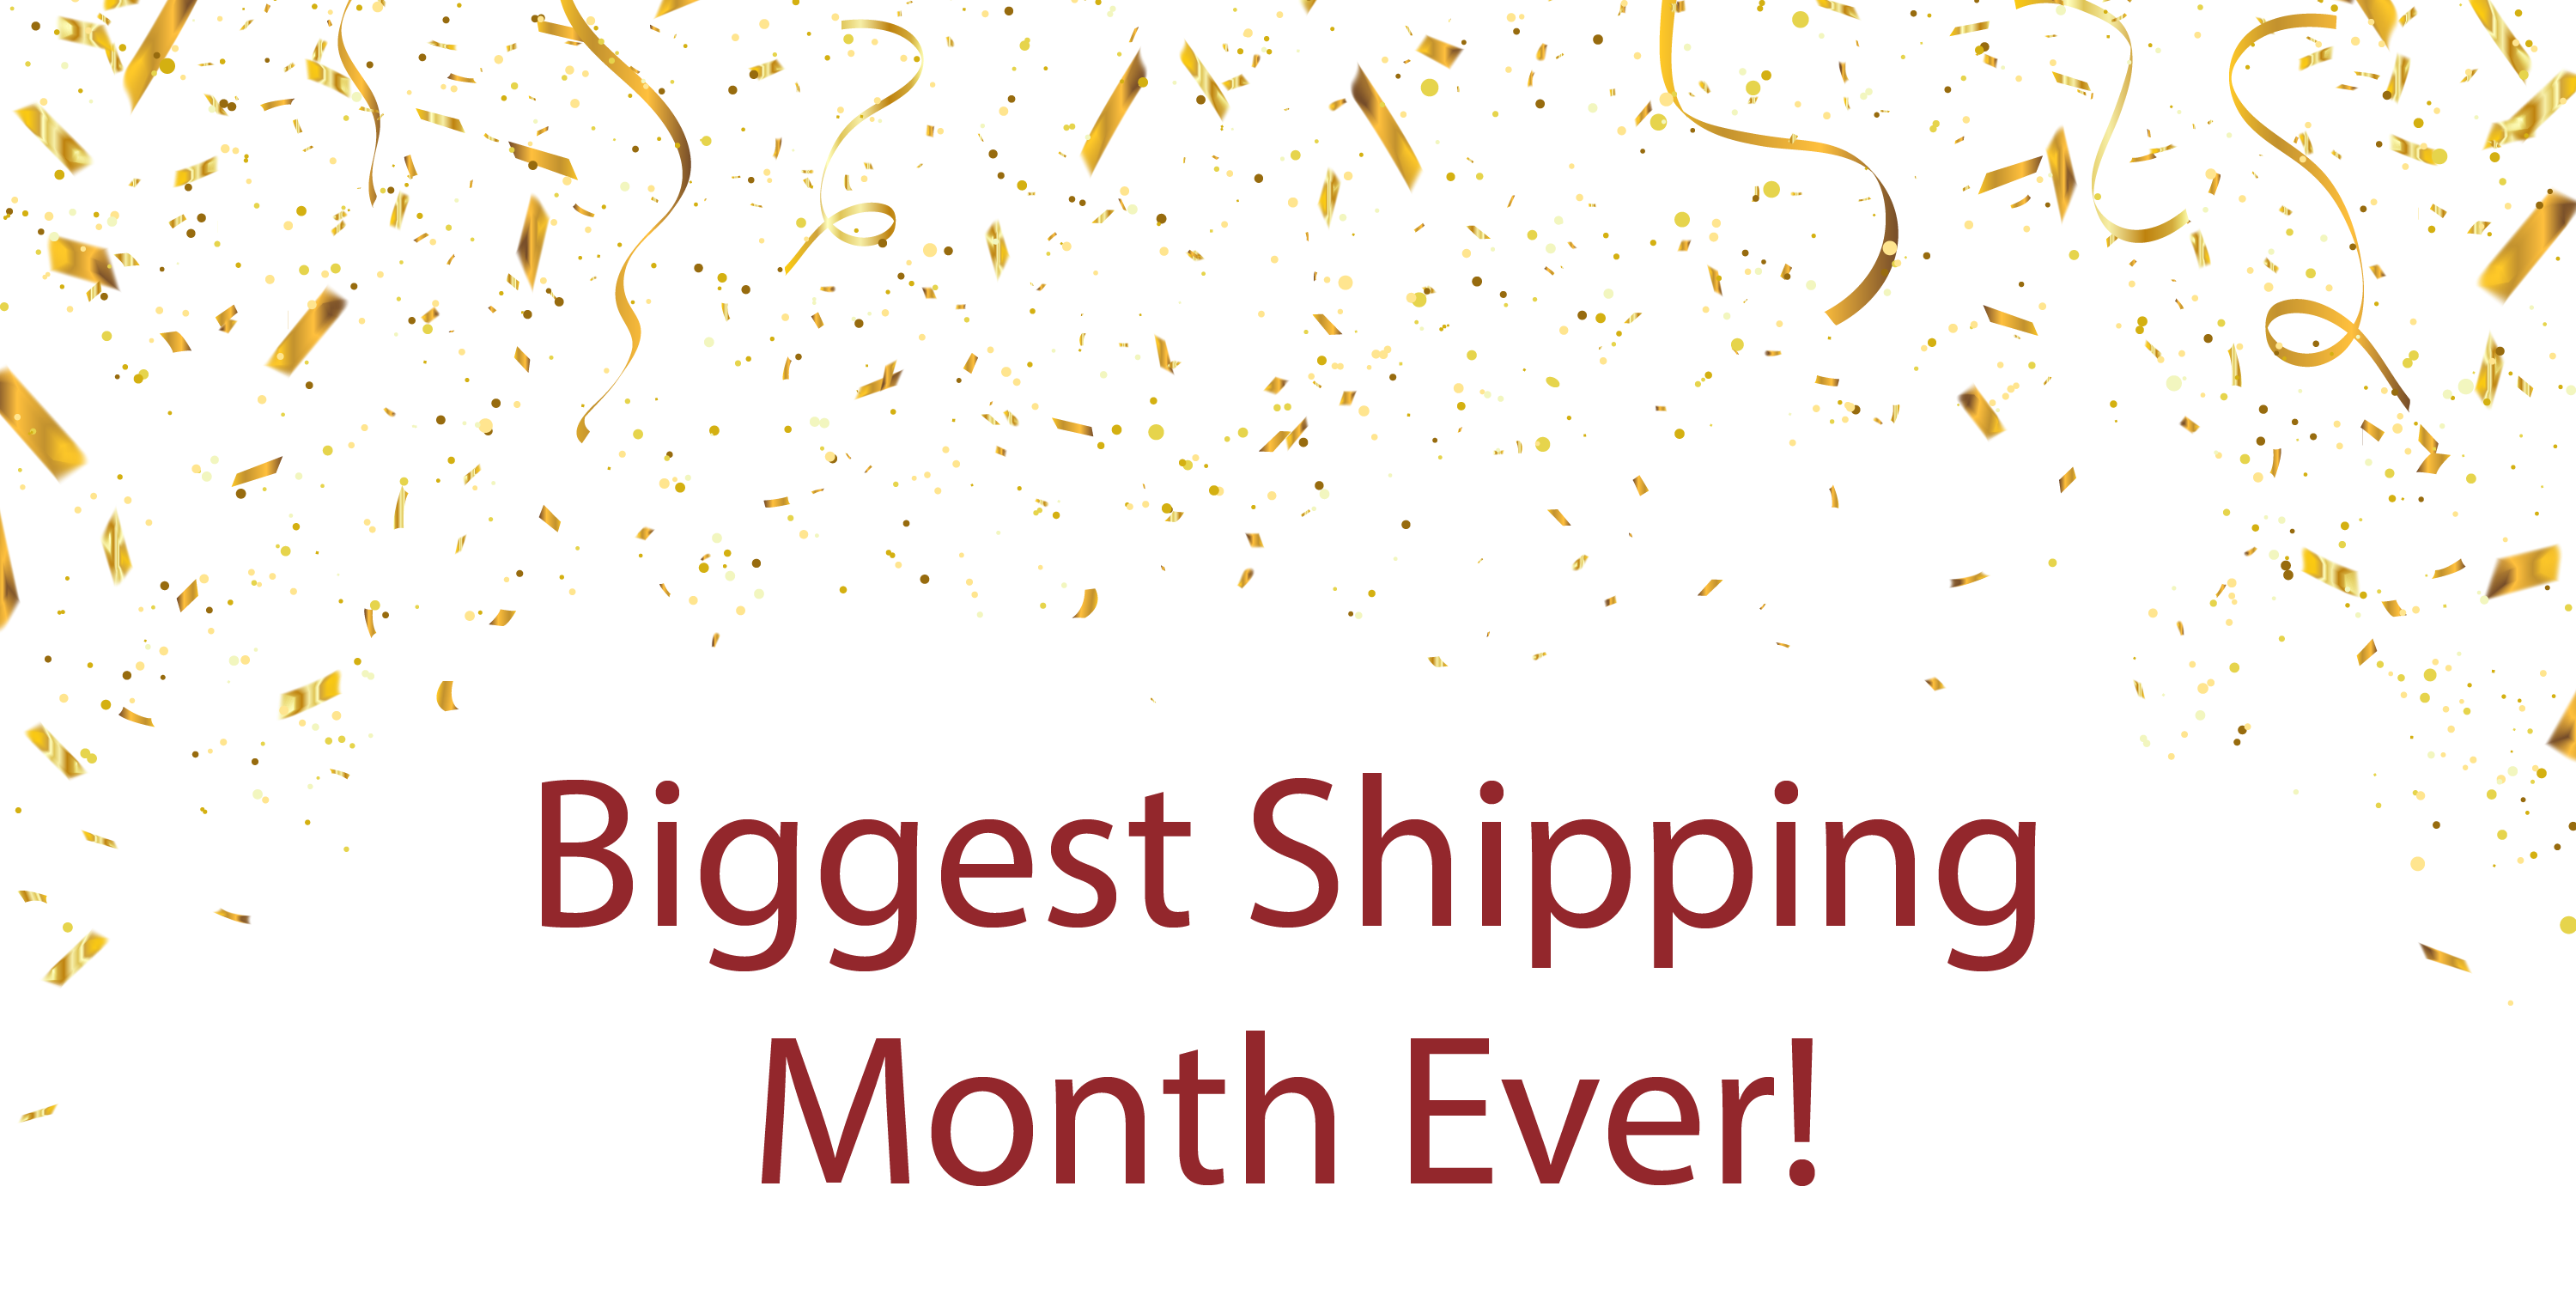 Biggest Shipping Month Ever! (with gold confetti)